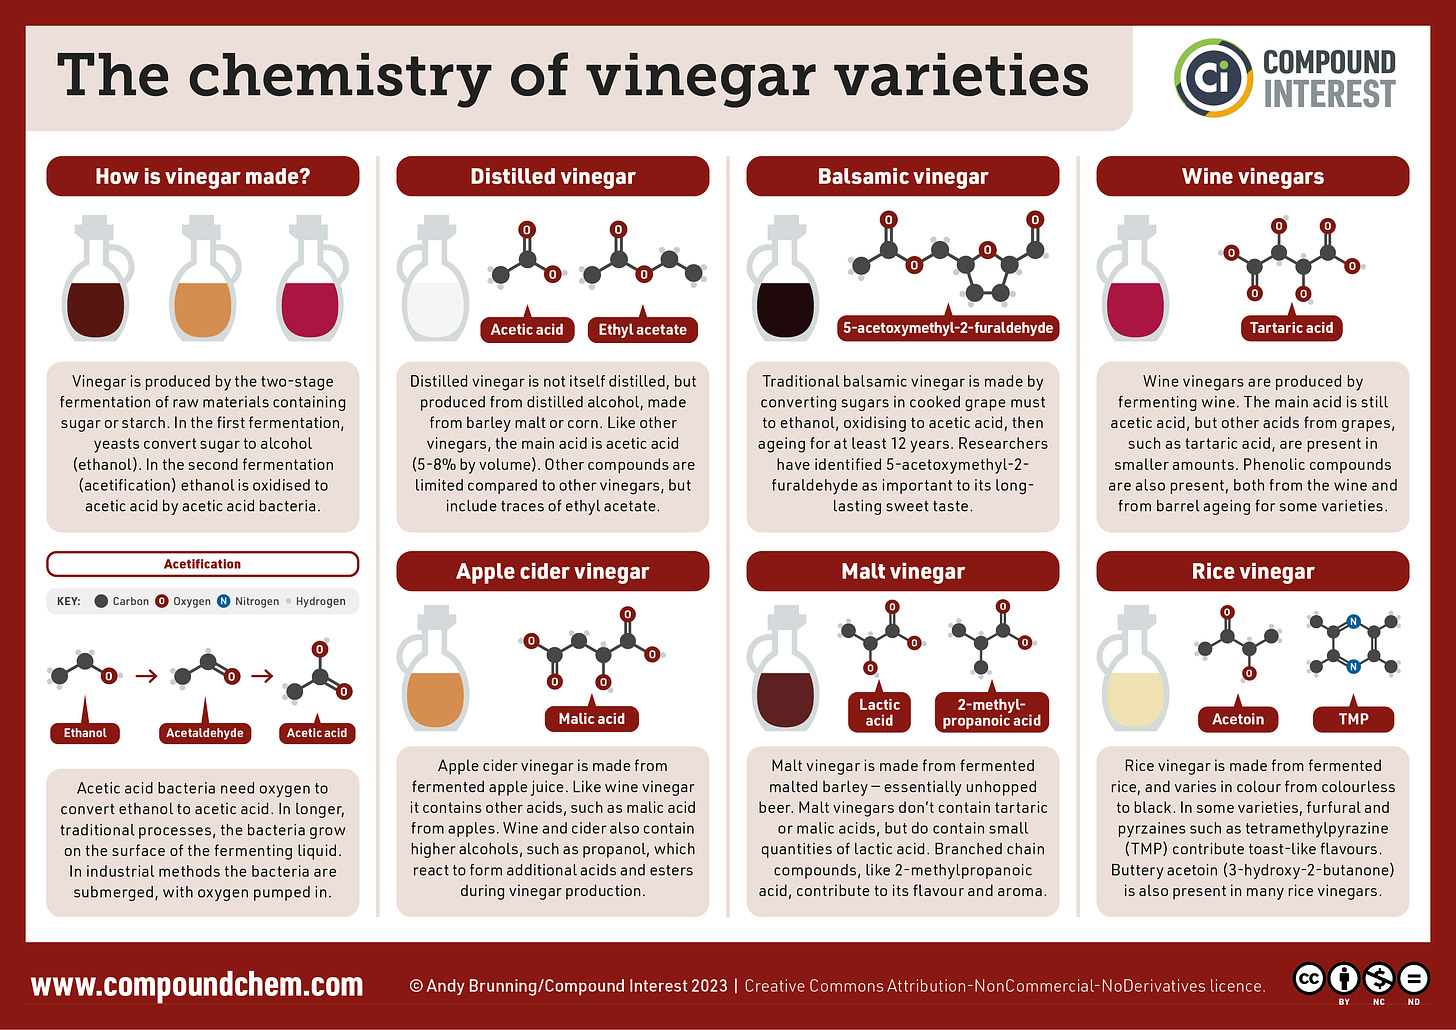 Infographic on the chemistry of different types of vinegars. First, an overview of vinegar production is shown, explaining the fermentation of sugars and starches into ethanol, then the subsequent oxidation of ethanol to acetic acid. Six different varieties of vinegar are then explored: Distilled vinegar, balsamic vinegar, wine vinegar, apple cider vinegar, malt vinegar, and rice vinegar. Chemical compounds of interest are highlighted for each, and also detailed in the post accompanying this image.